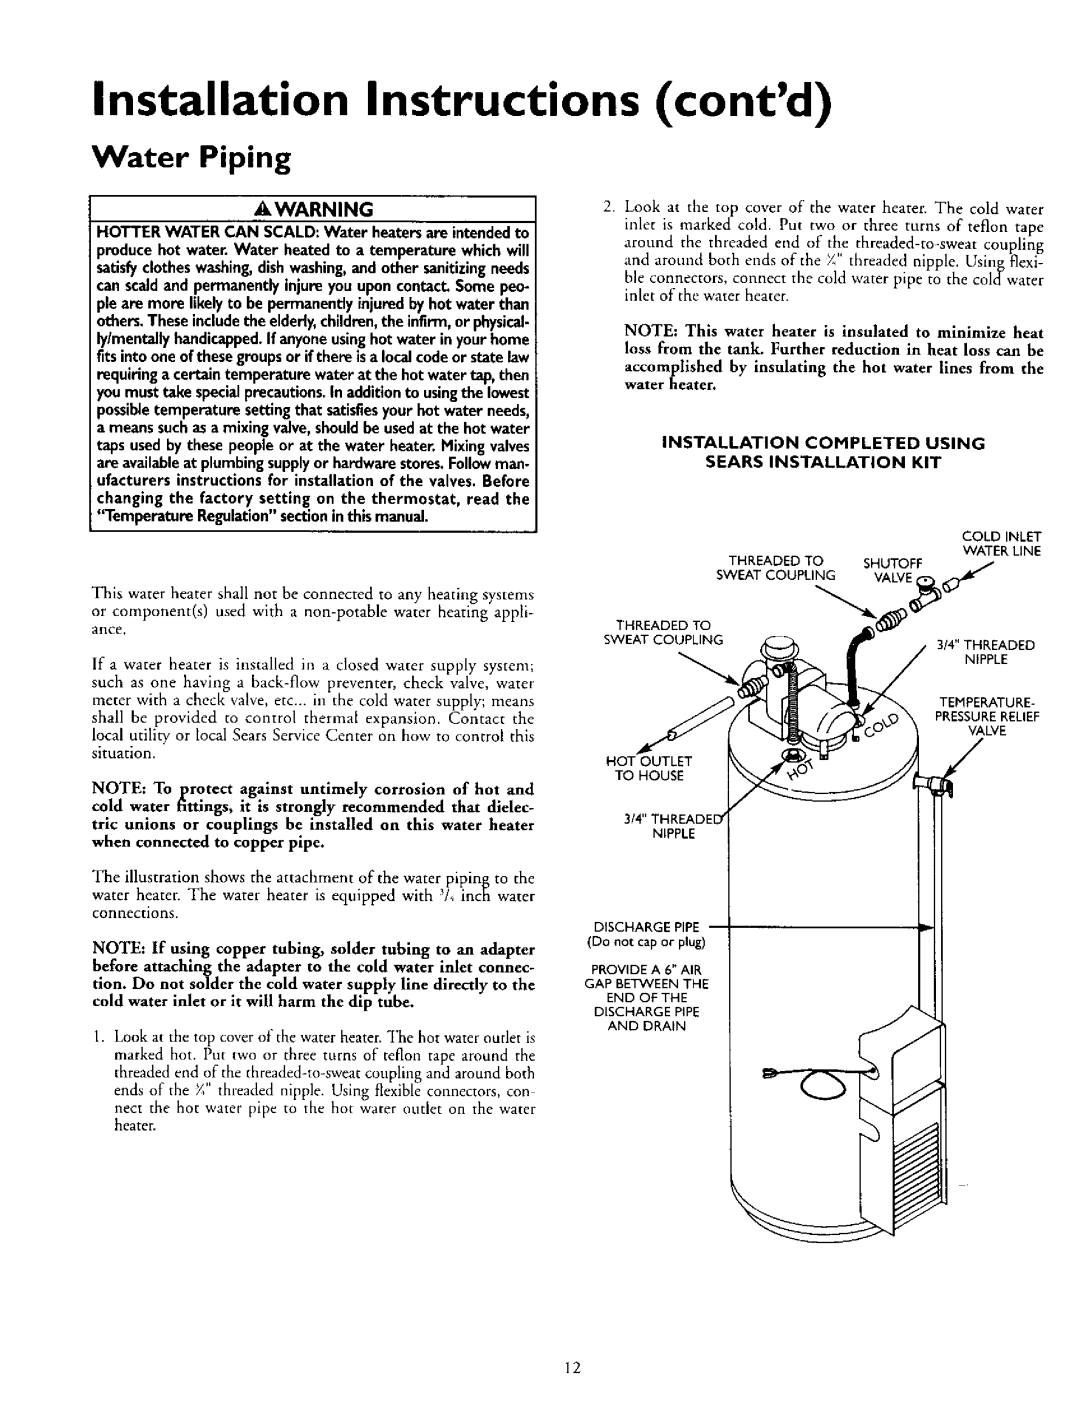 Kenmore L53.335816 Water Piping, Installation Instructions contd, Installation Completed Using, Sears Installation Kit 